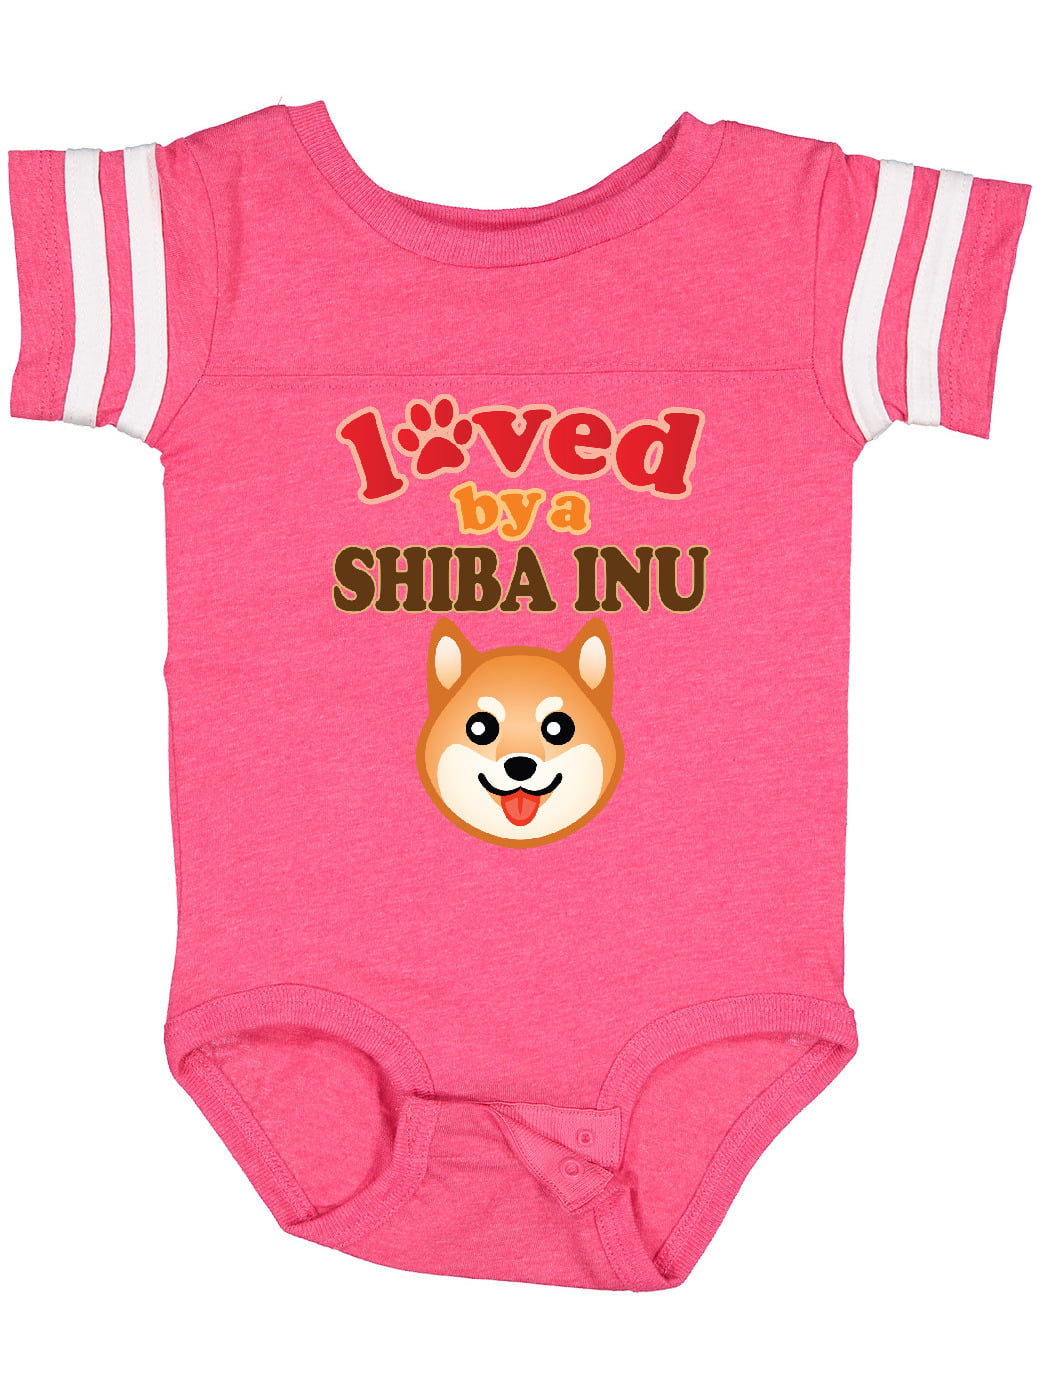 Shiba Inu Dog Unisex Baby Onesie Cartoon Newborn Clothes Funny Baby Outfits Comfortable Baby Clothes